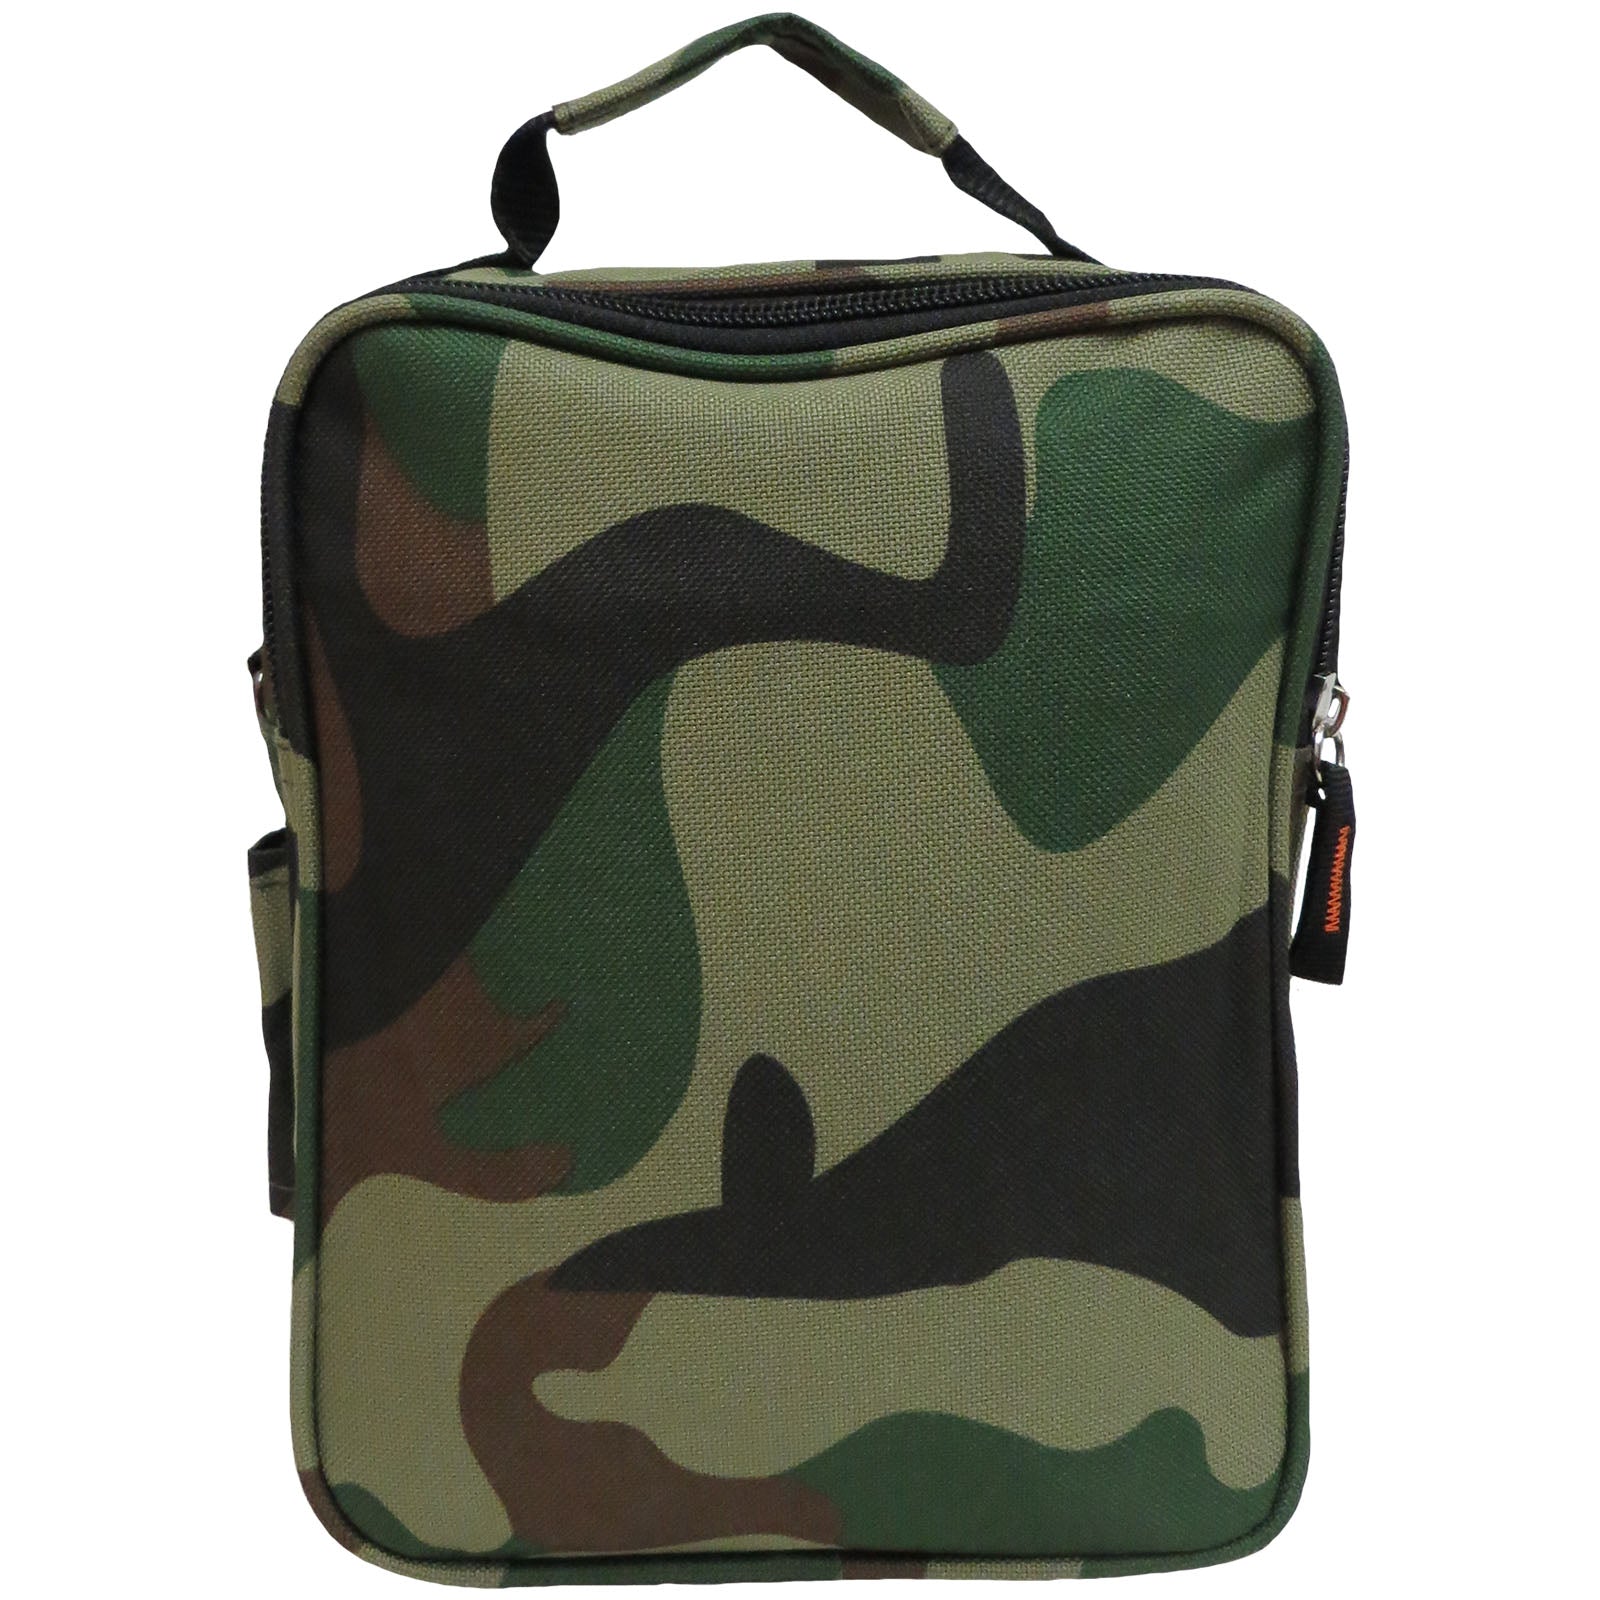 Wholesale Messenger Bag Camouflage Print Convertible to Fanny Pack - Alessa Jamie